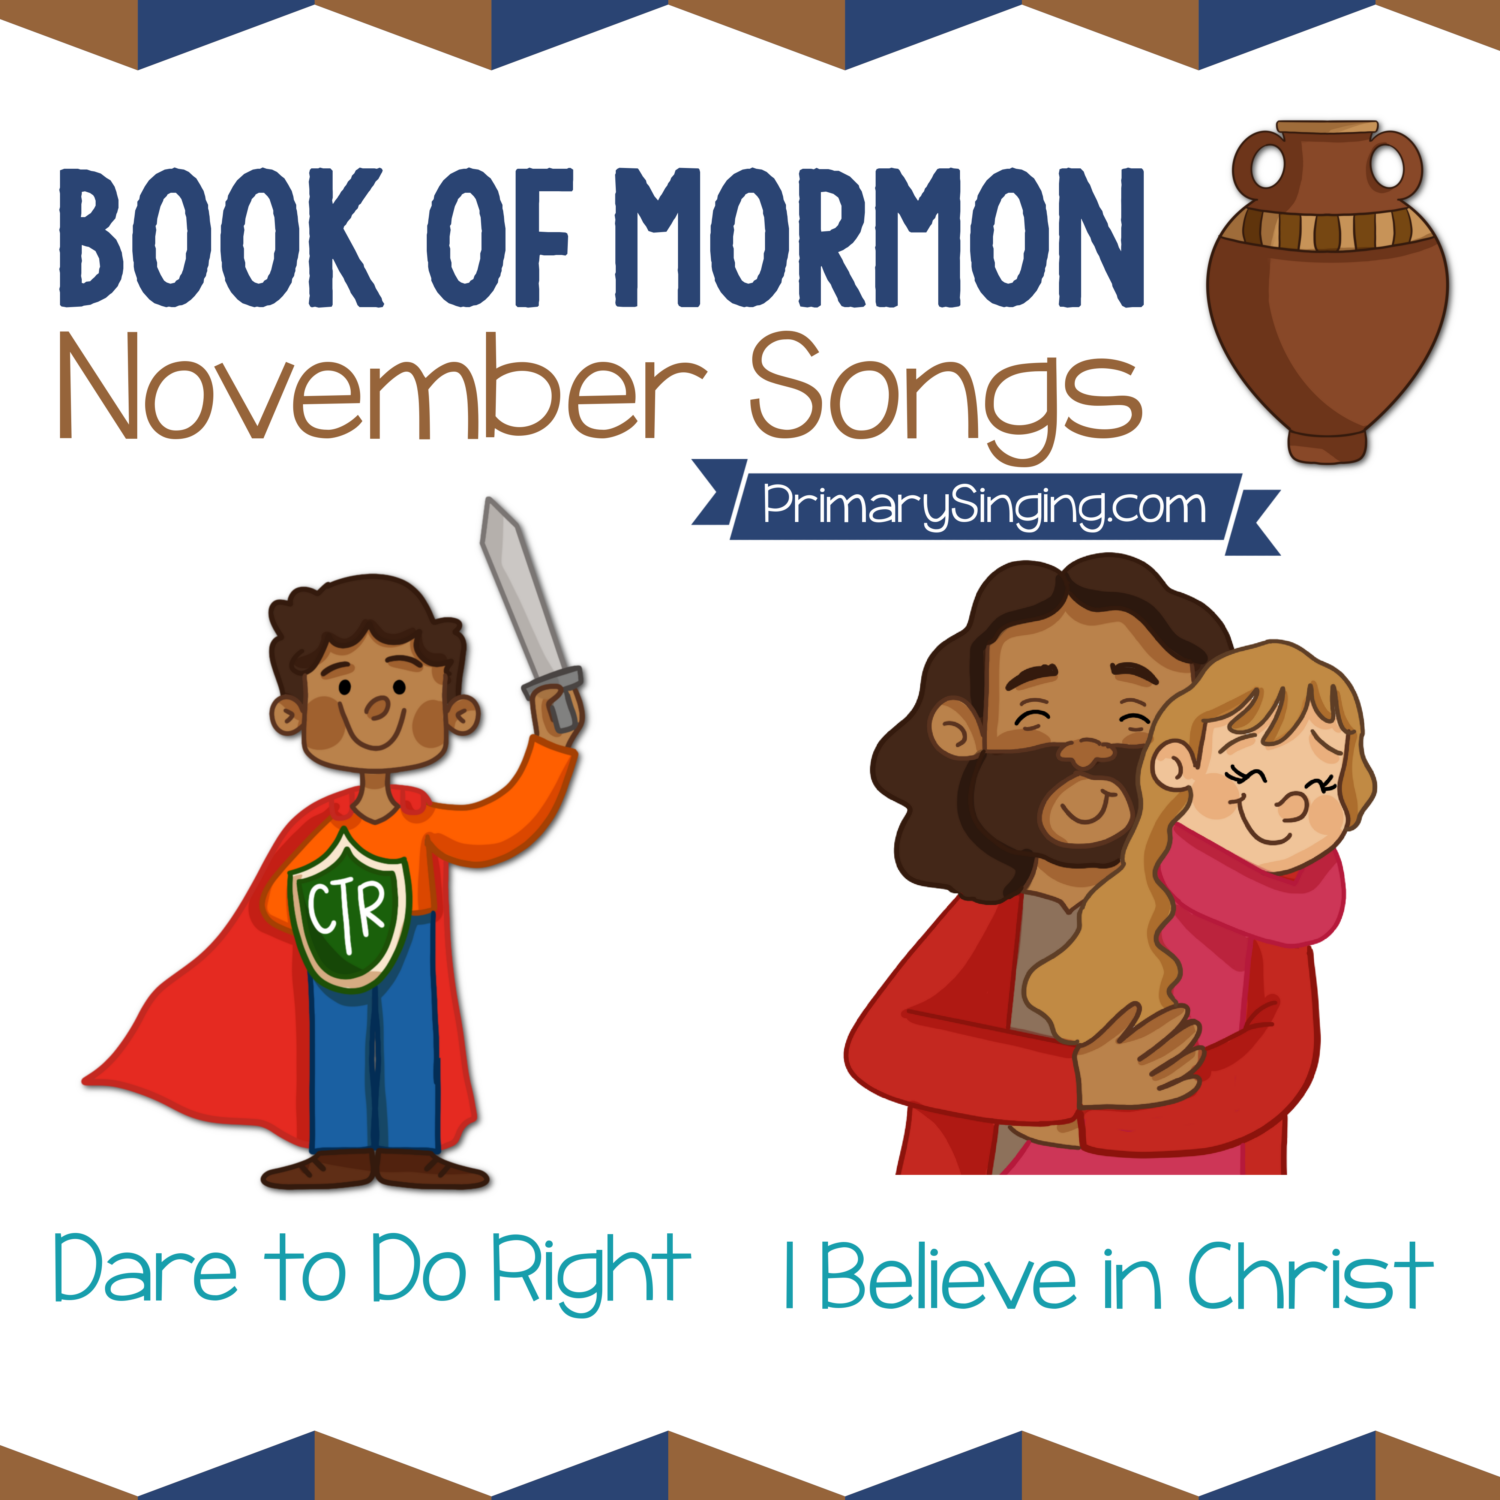 Book of Mormon November Song List - Dare to Do Right and I Believe in Christ. Teach these 2 great Primary songs during Singing Time or home Come Follow Me lessons.